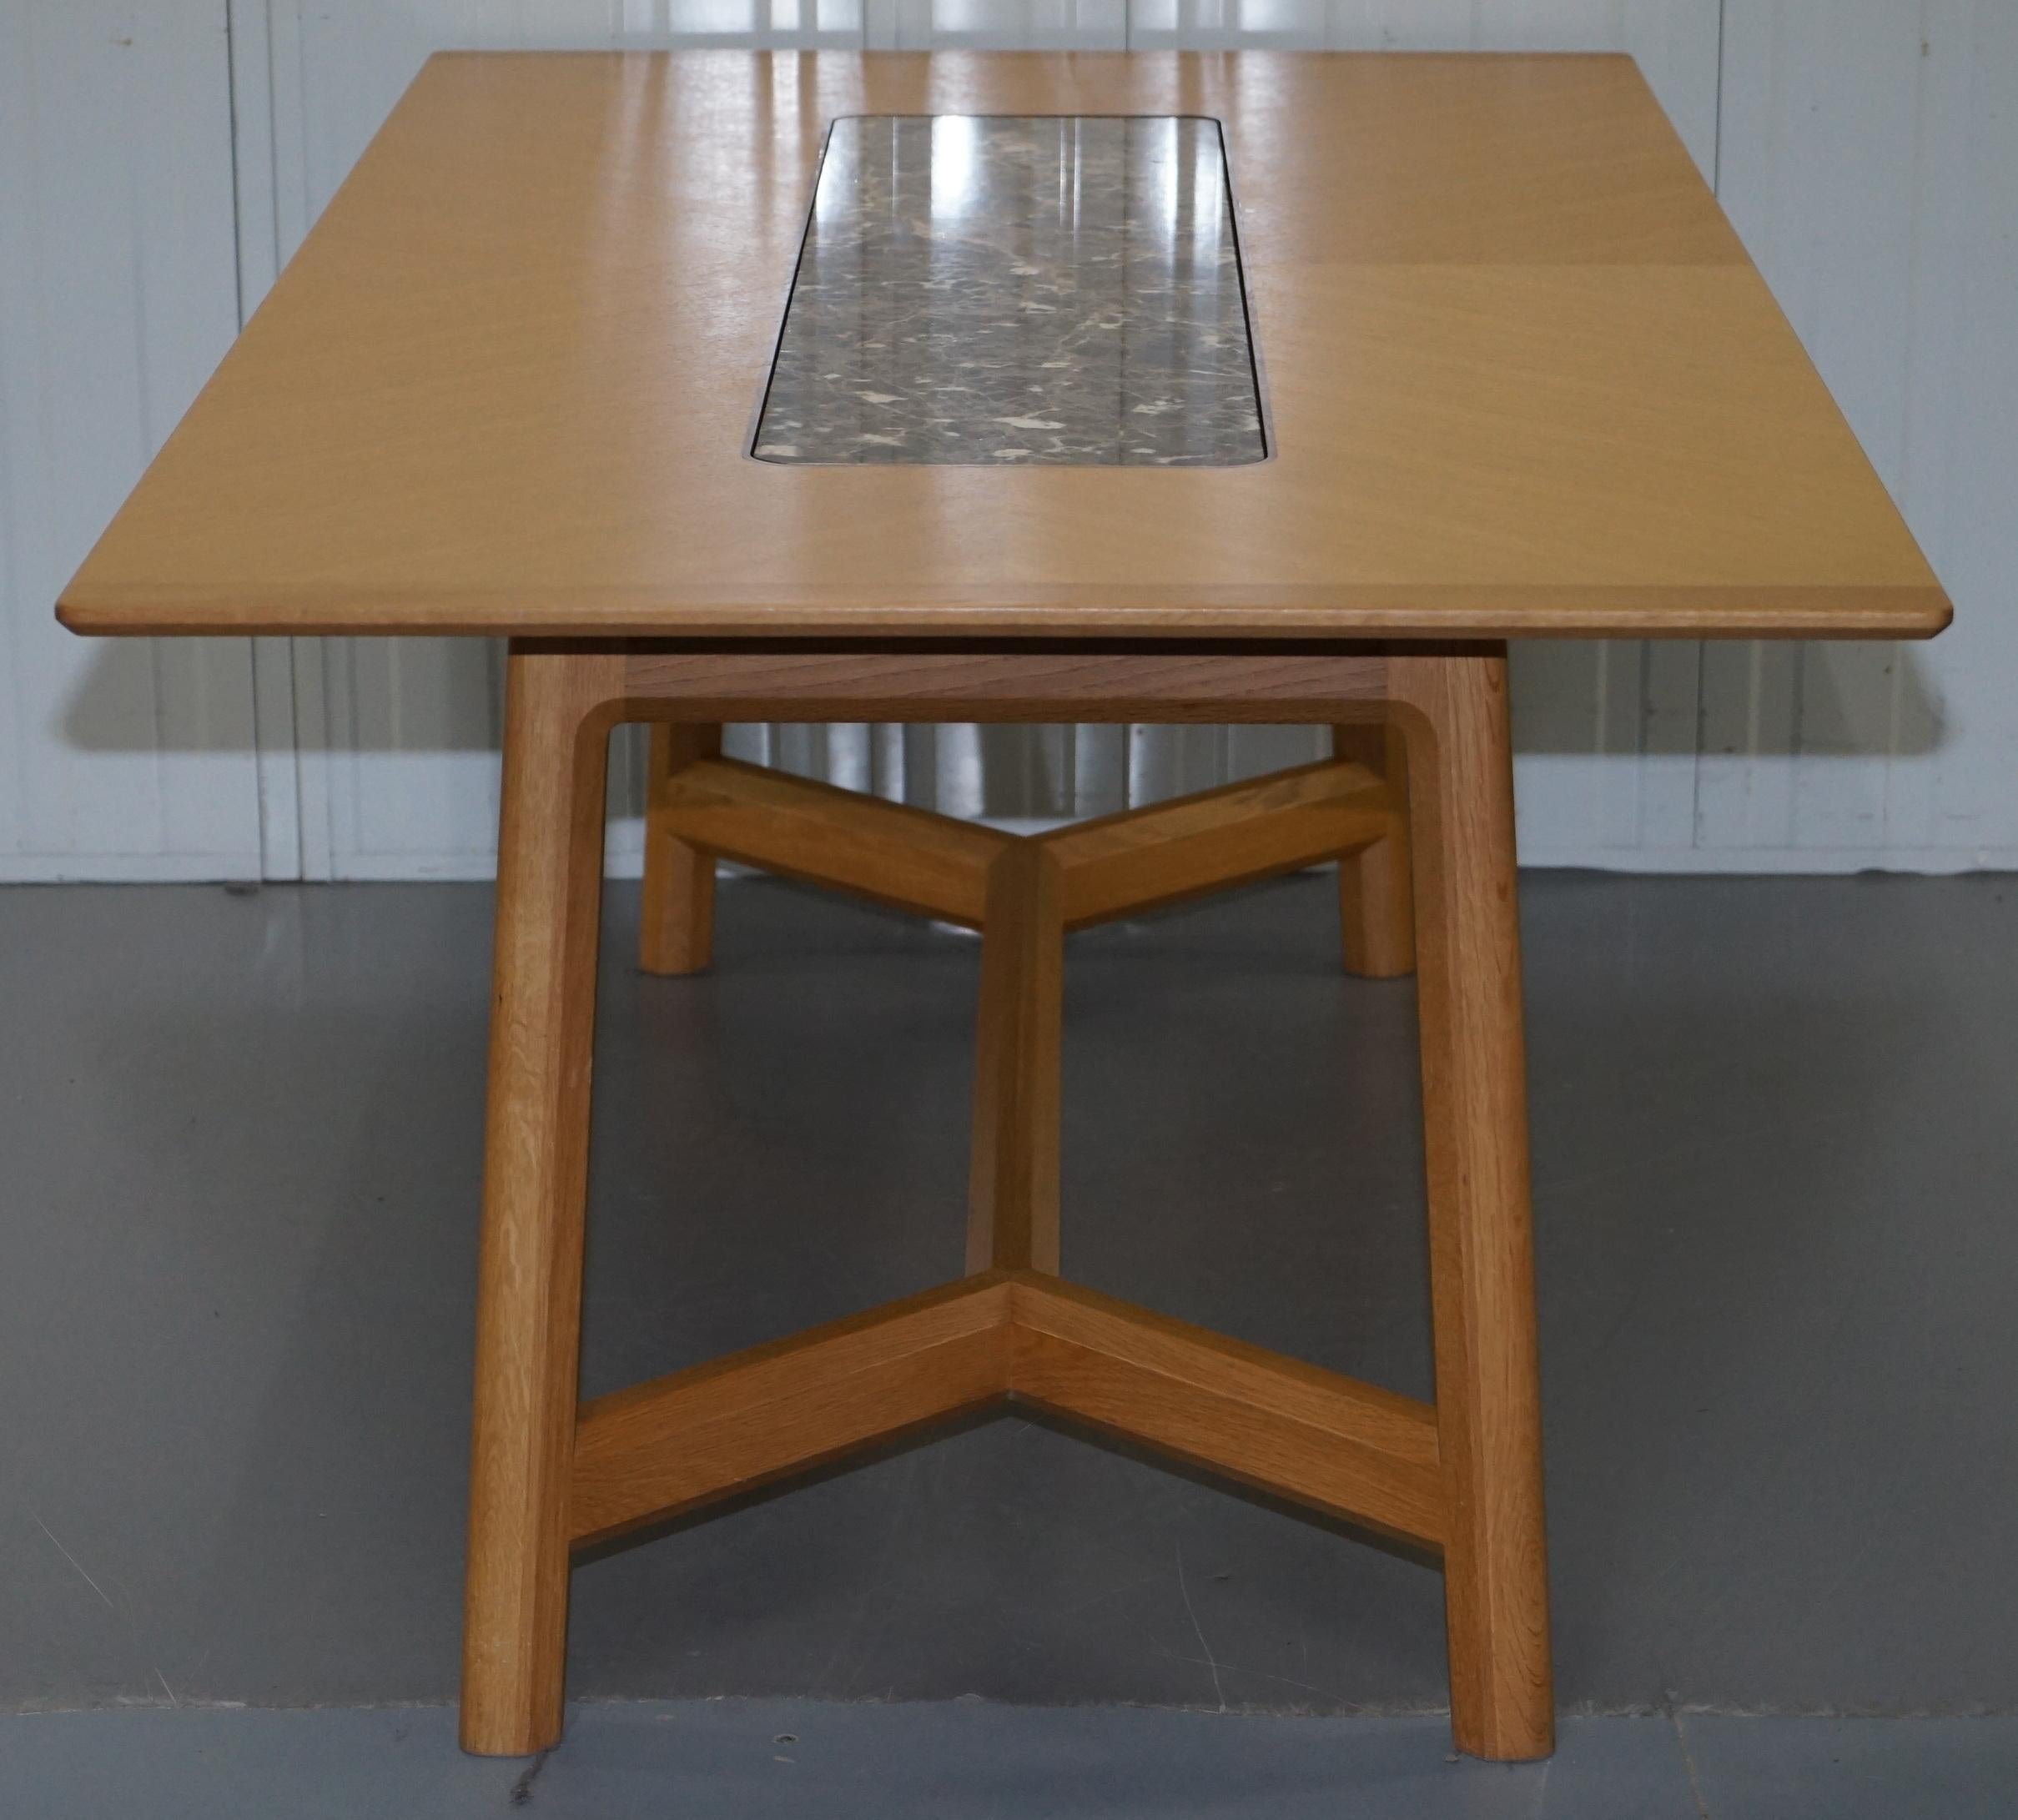 David Linley Newlyn Sycamore Wood and Marble Hayrake Dining Table For Sale 6